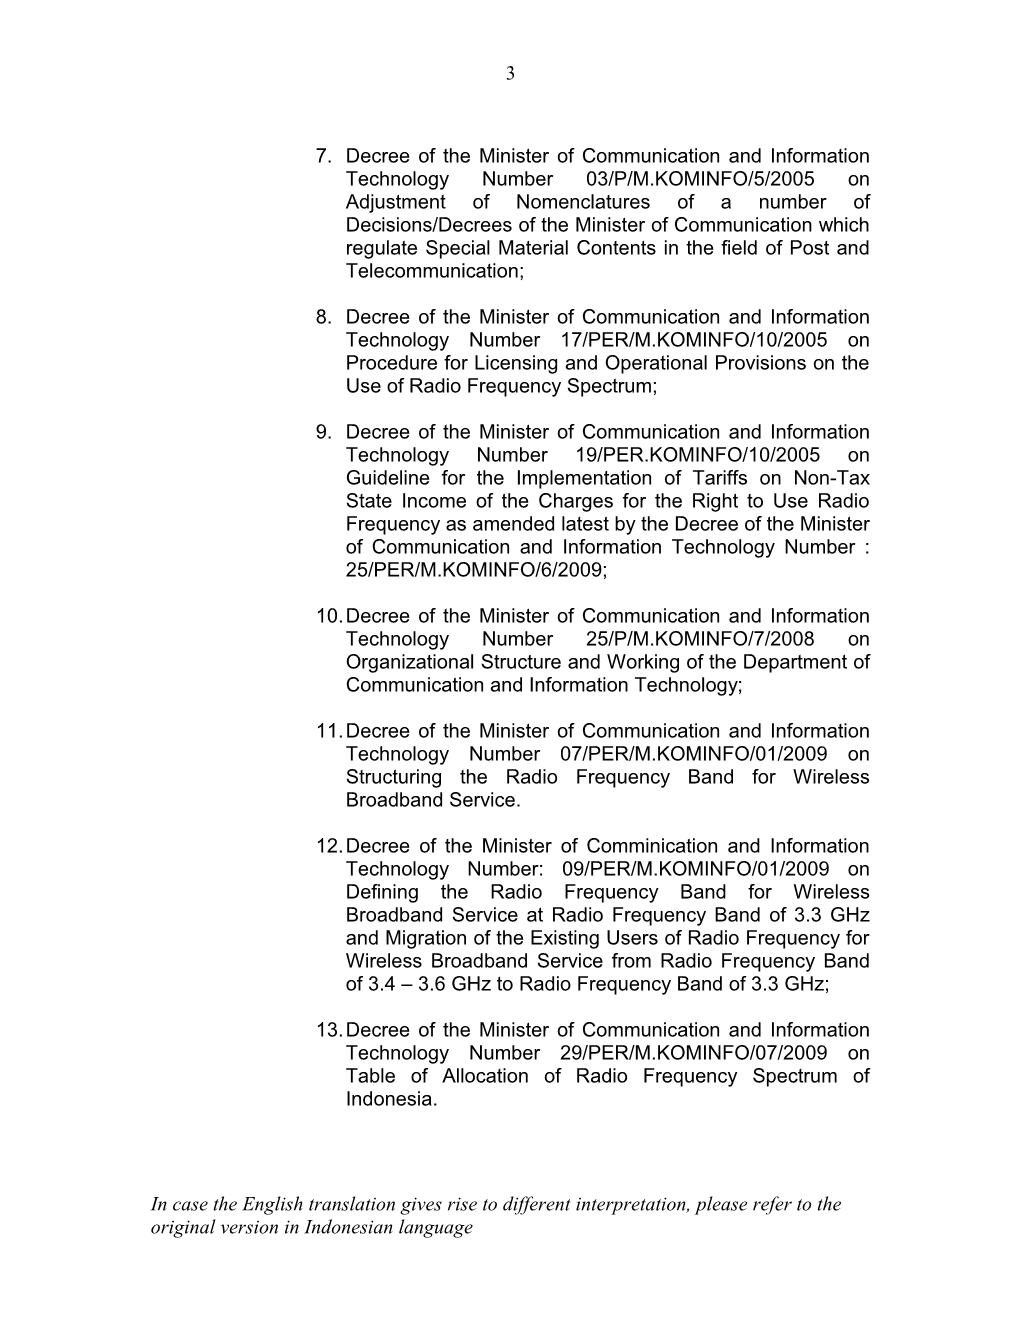 Decree of the Minister of Communication and Information Technology